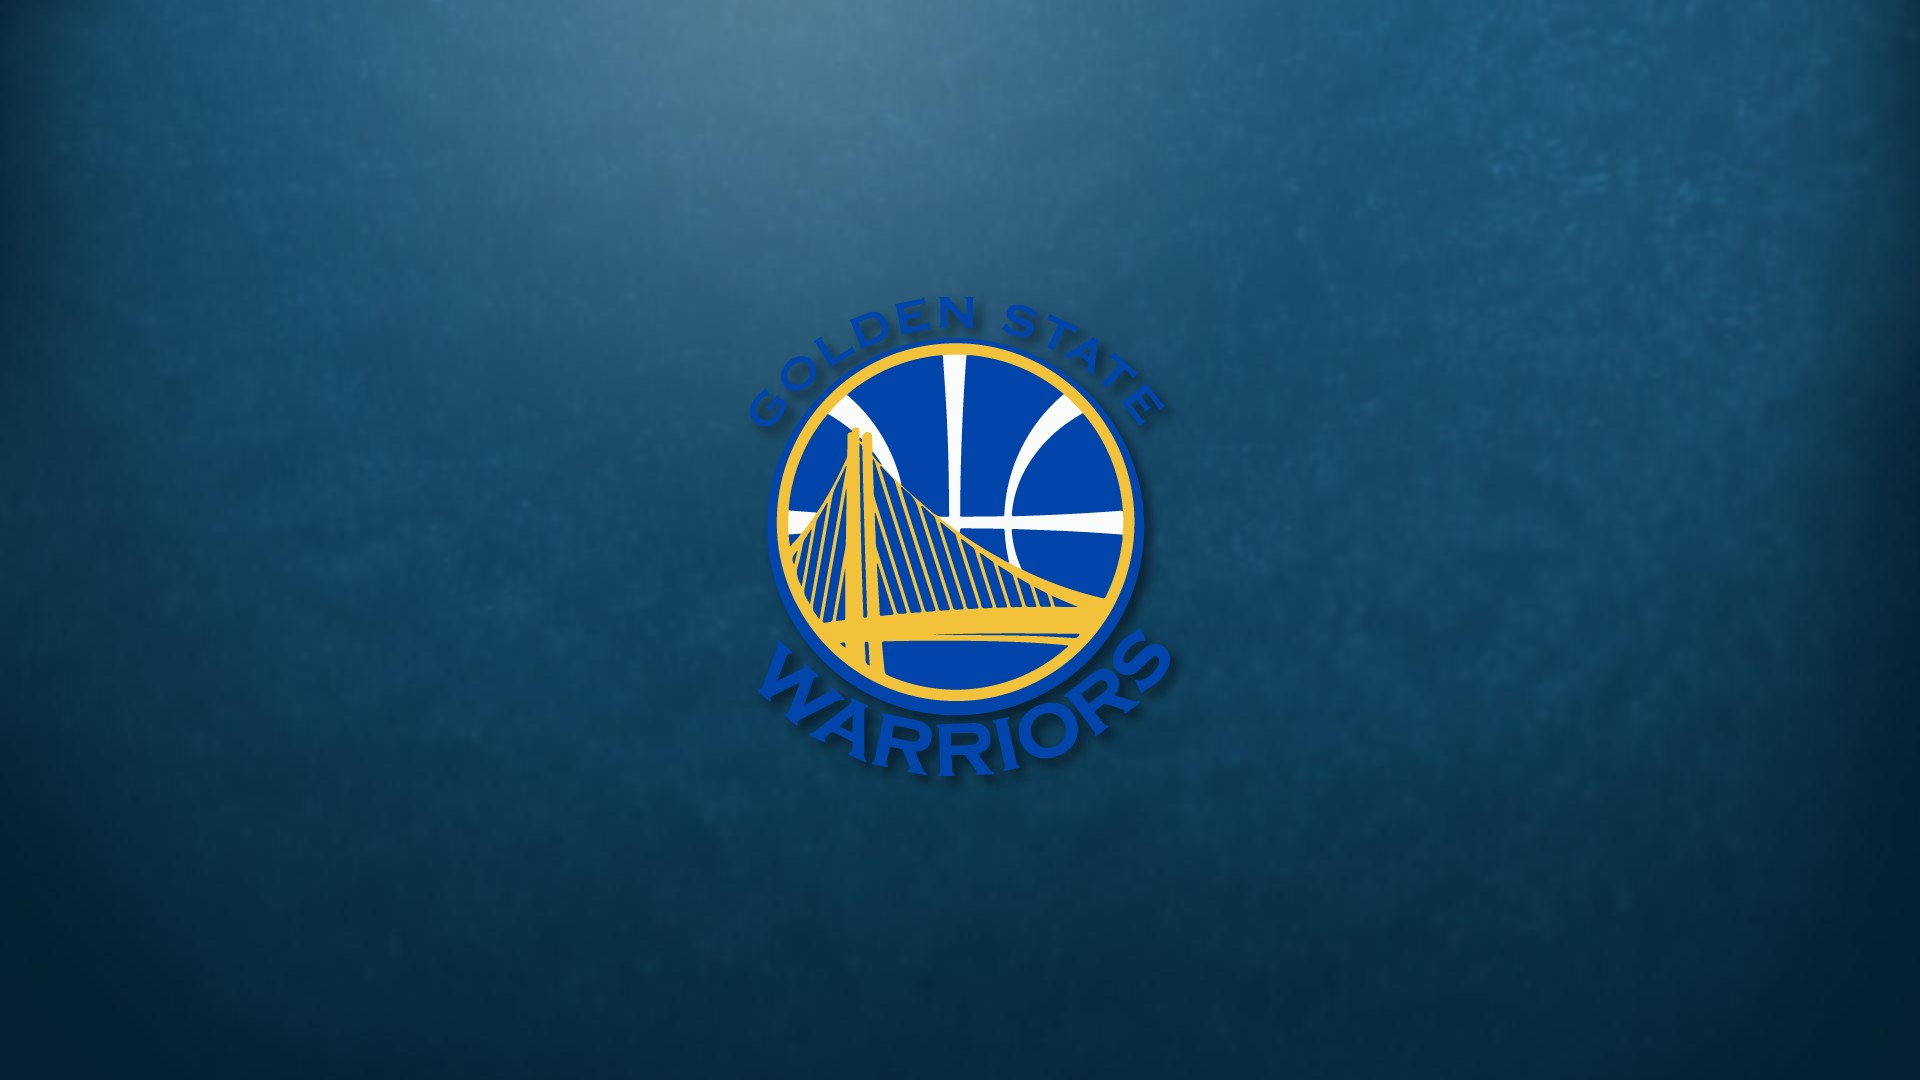 Desktop Wallpaper Golden State Warriors with image resolution 1920x1080 pixel. You can use this wallpaper as background for your desktop Computer Screensavers, Android or iPhone smartphones